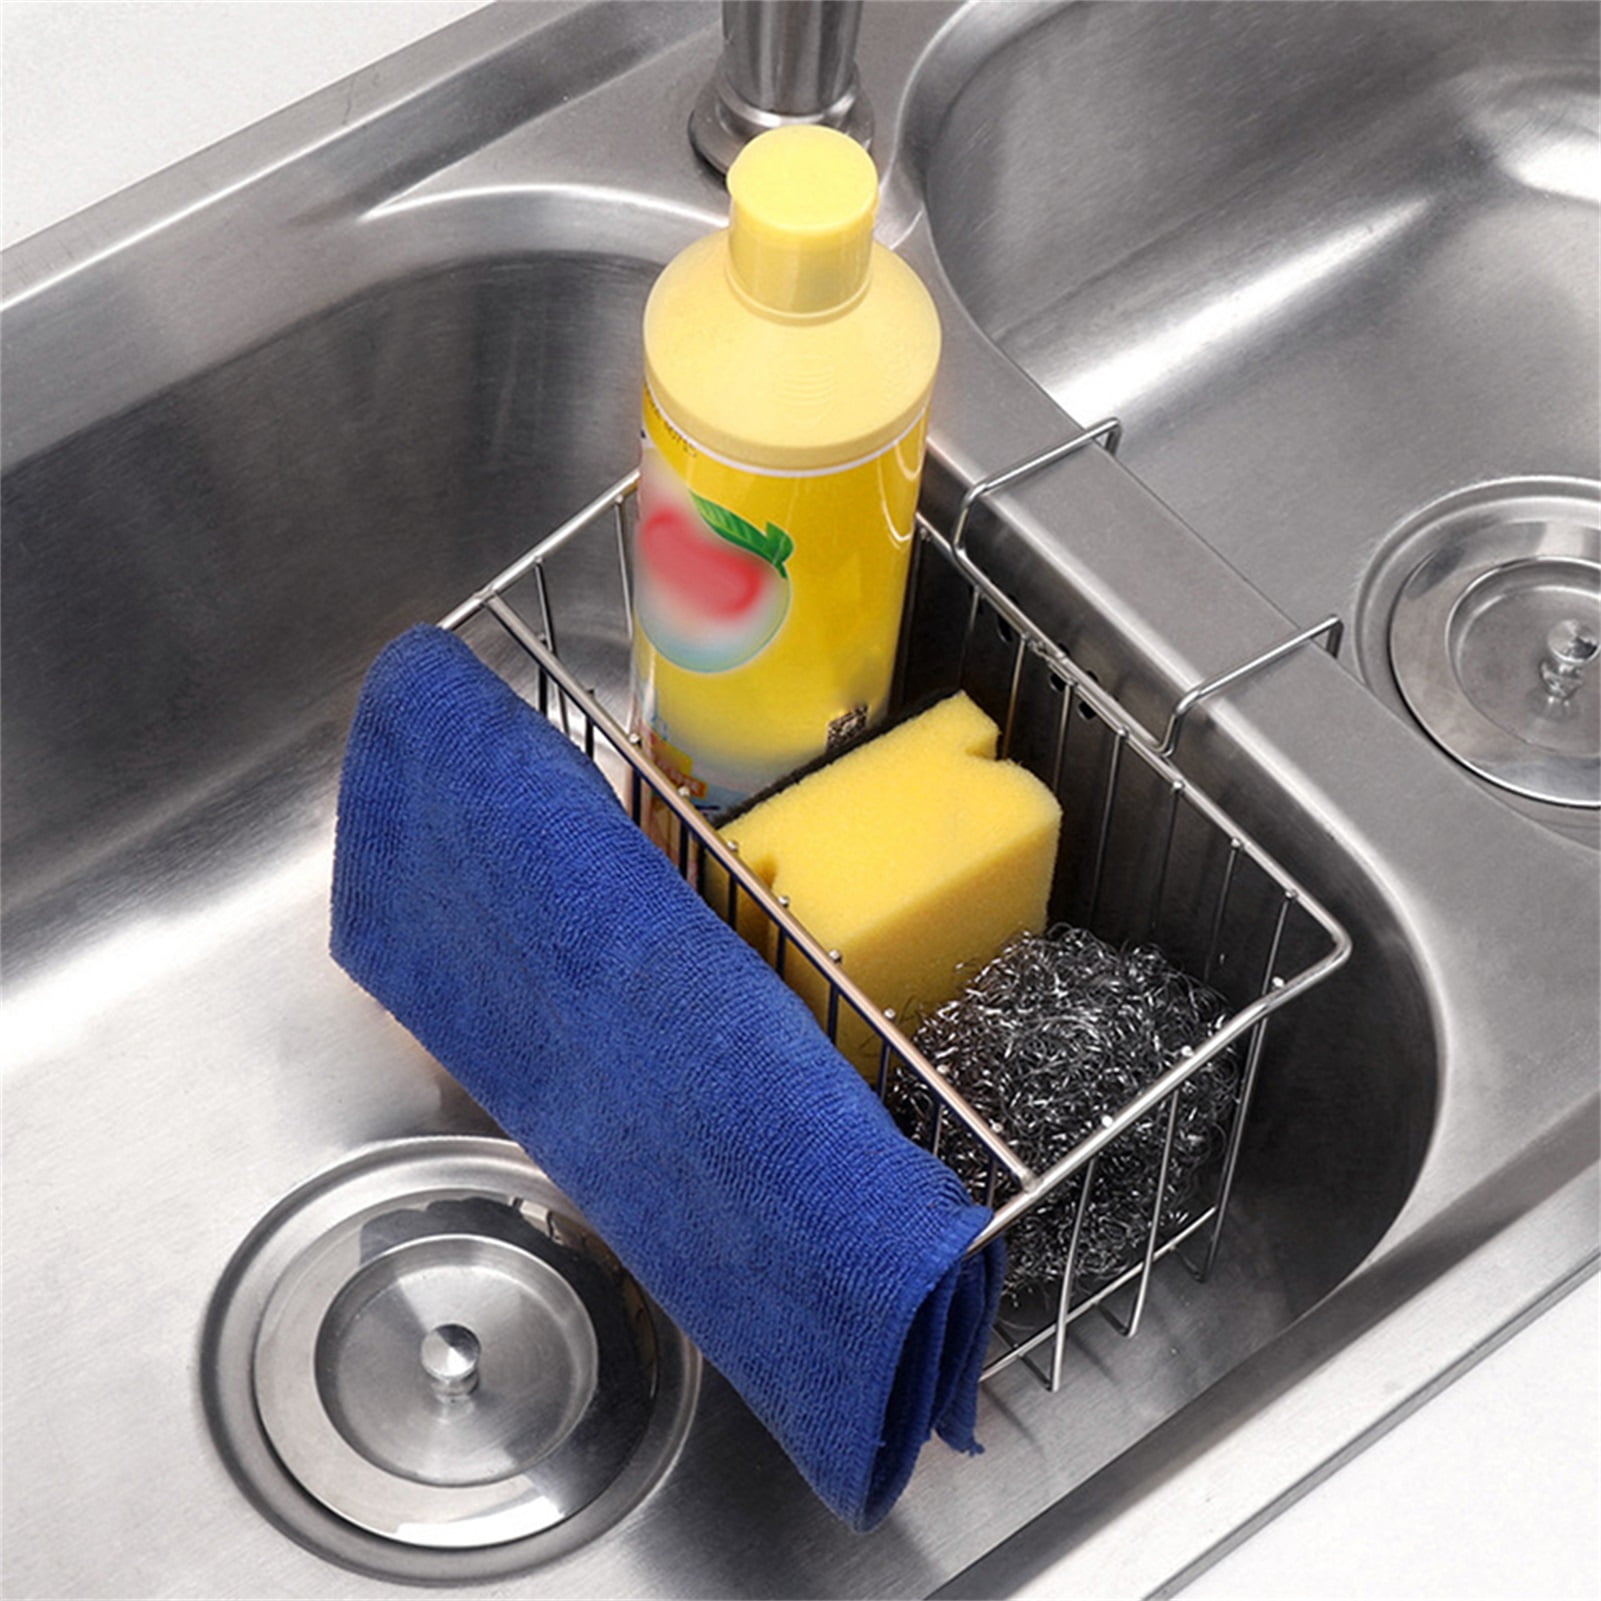 1pc Sponge Holder For Kitchen Sink, Kitchen Sink Caddy With Dish Brush  Holder And Dish Cloth Hanger, Sponge Caddy For Soap, Sponge And Scrubber,  No Dr